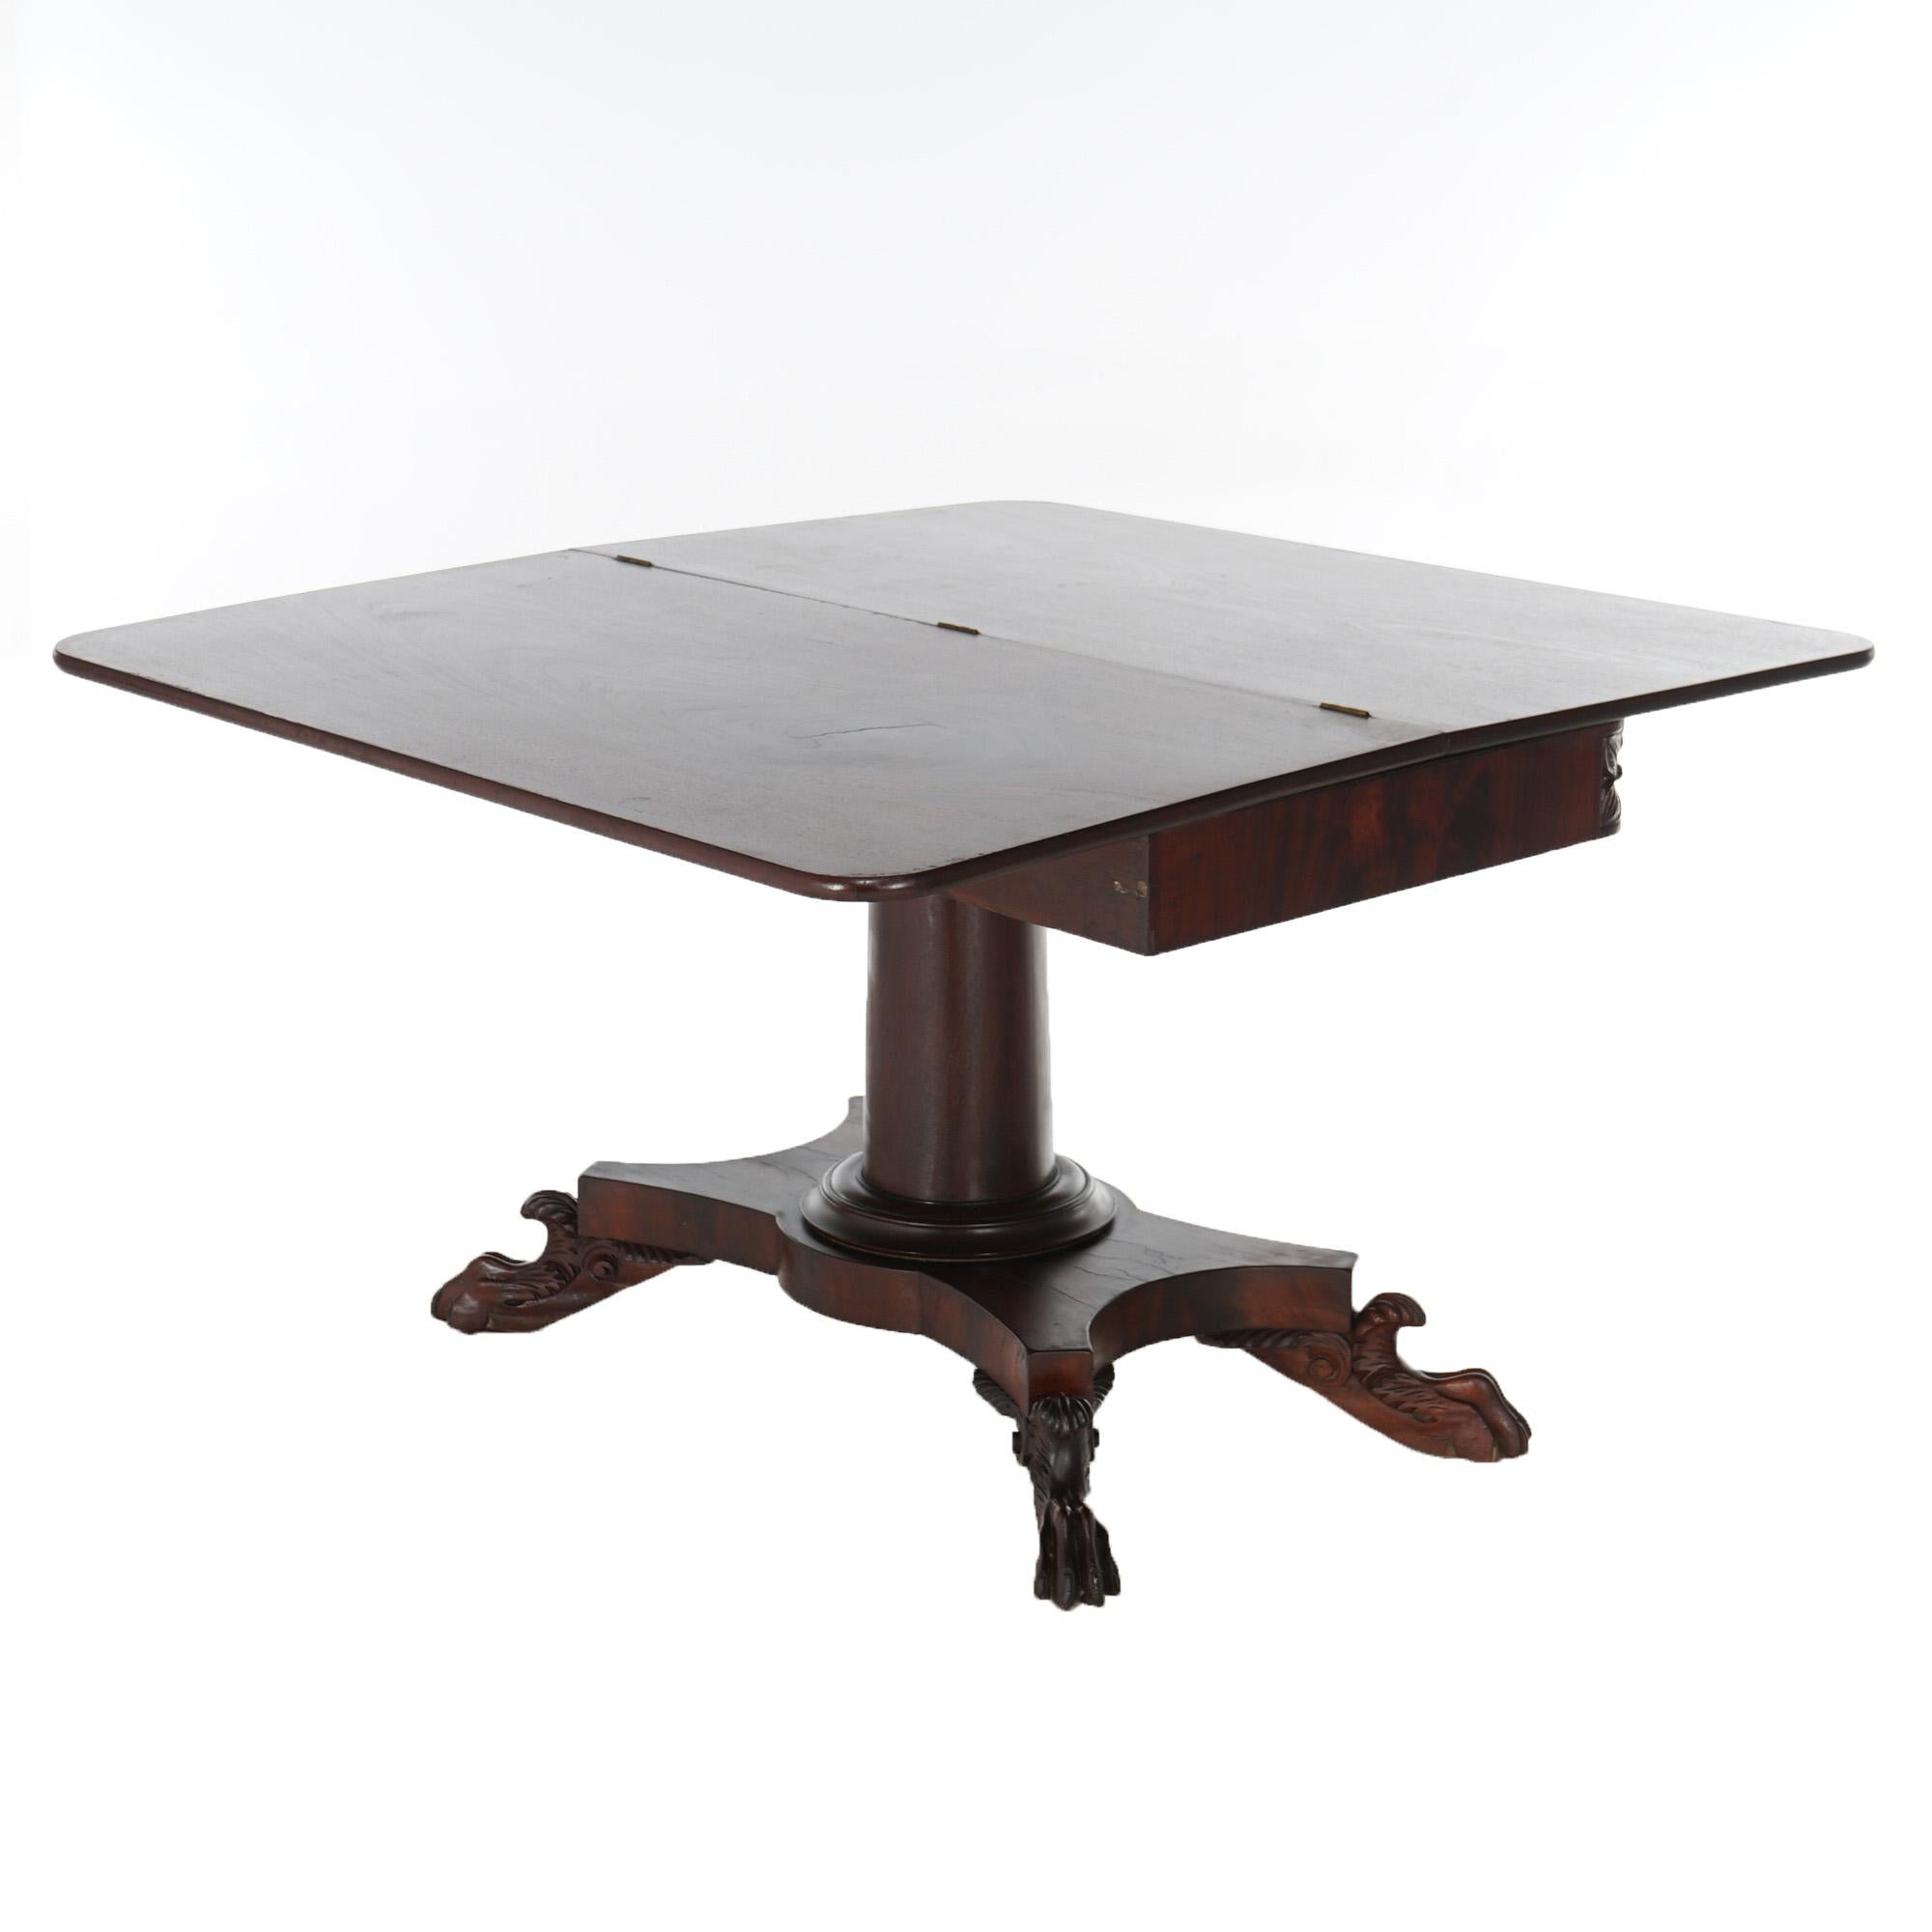 Antique American Empire Flame Mahogany Card Table Circa 1840 For Sale 11